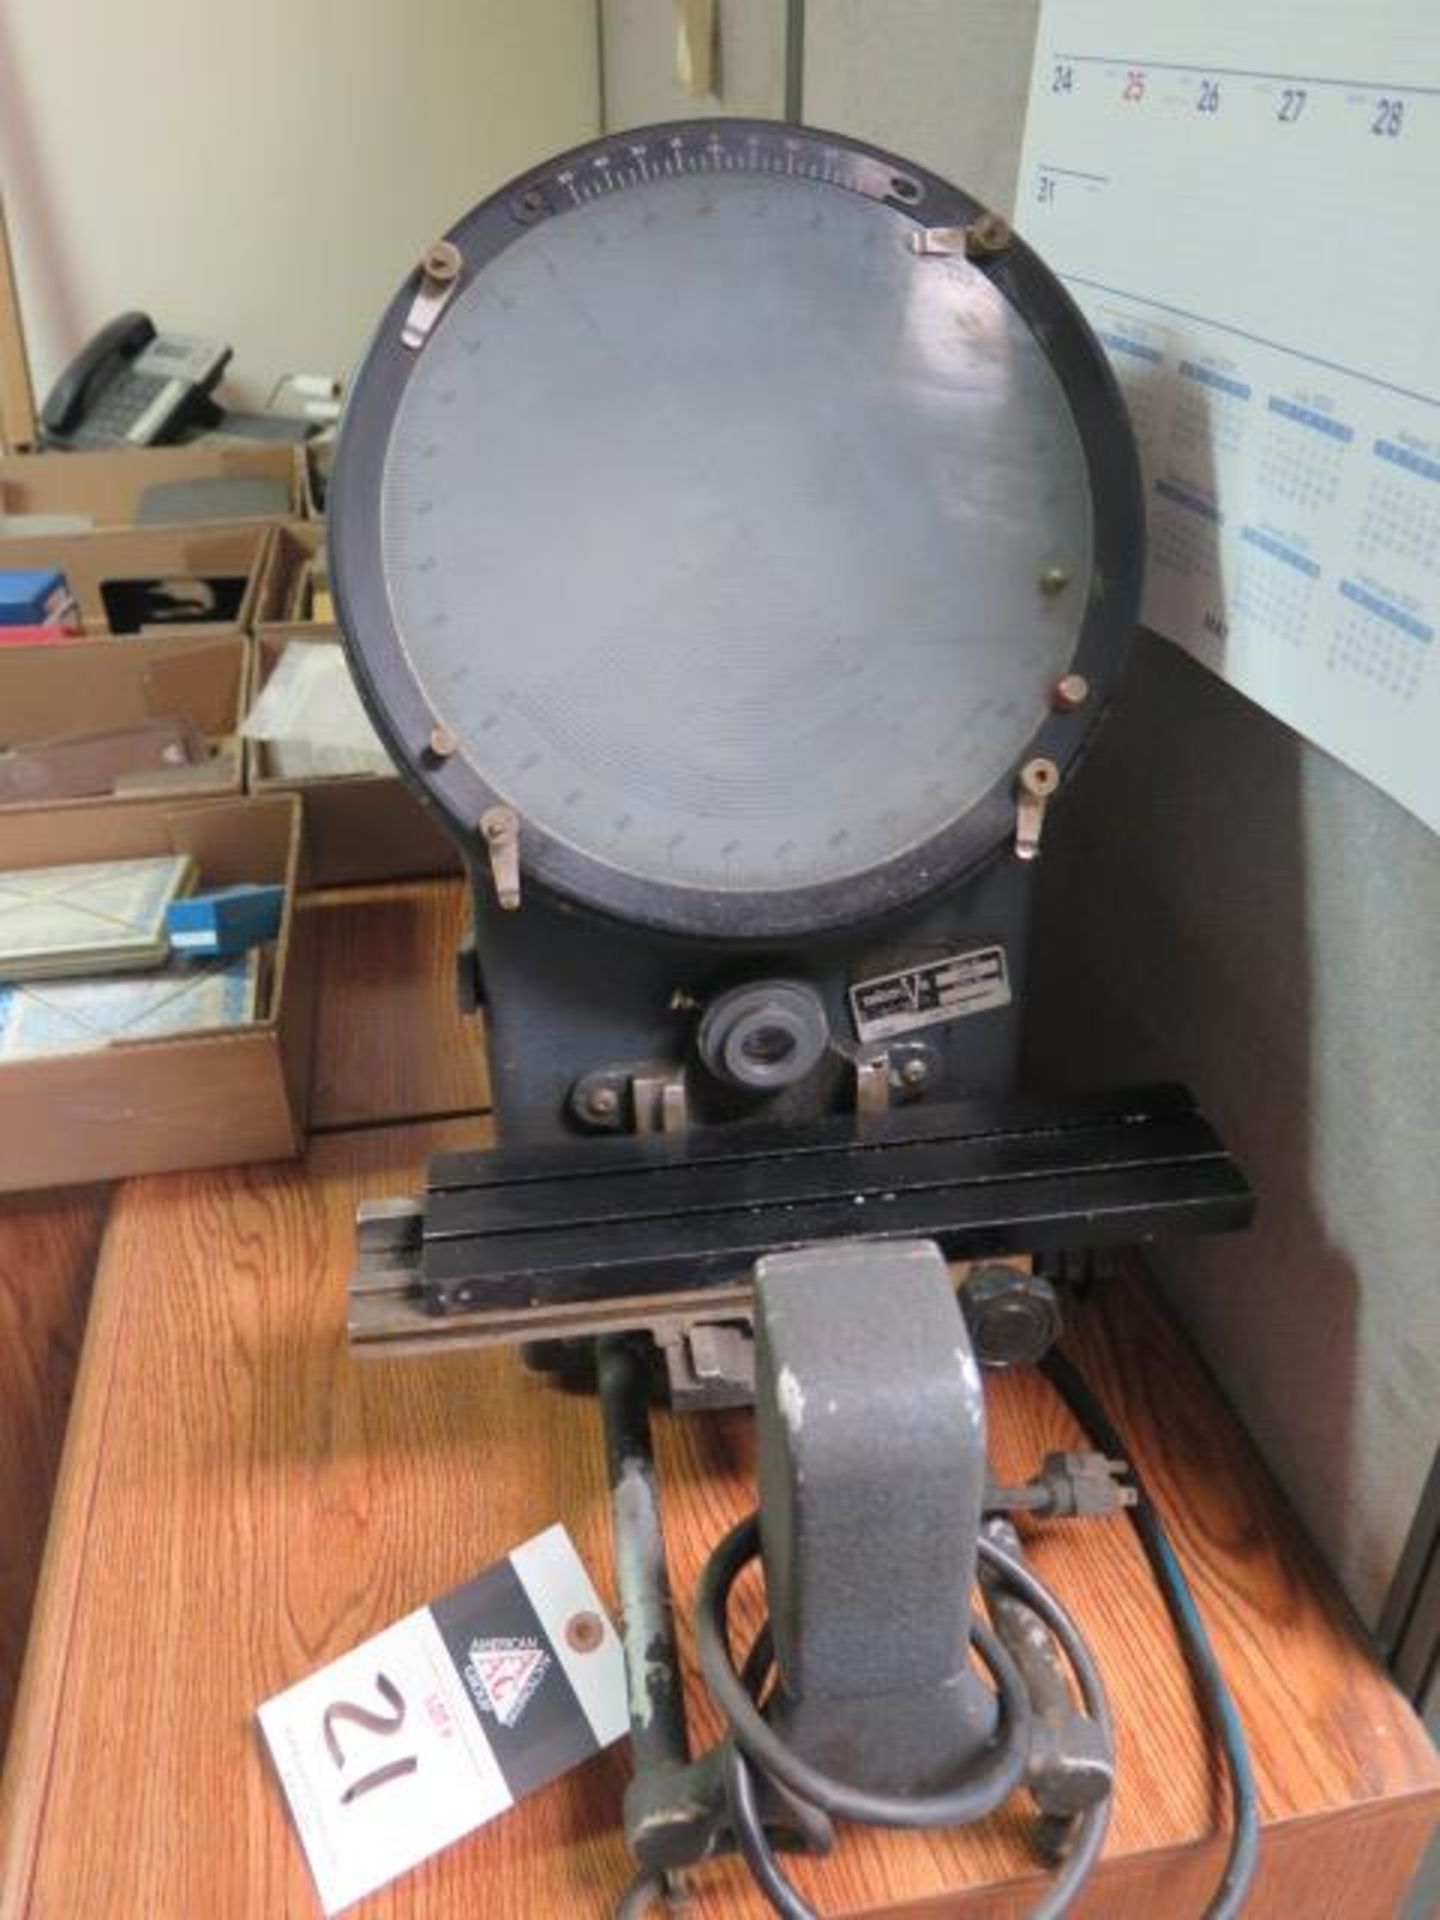 MicroVu mdl. 400 10" Table Model Optical Comparator - Image 2 of 5